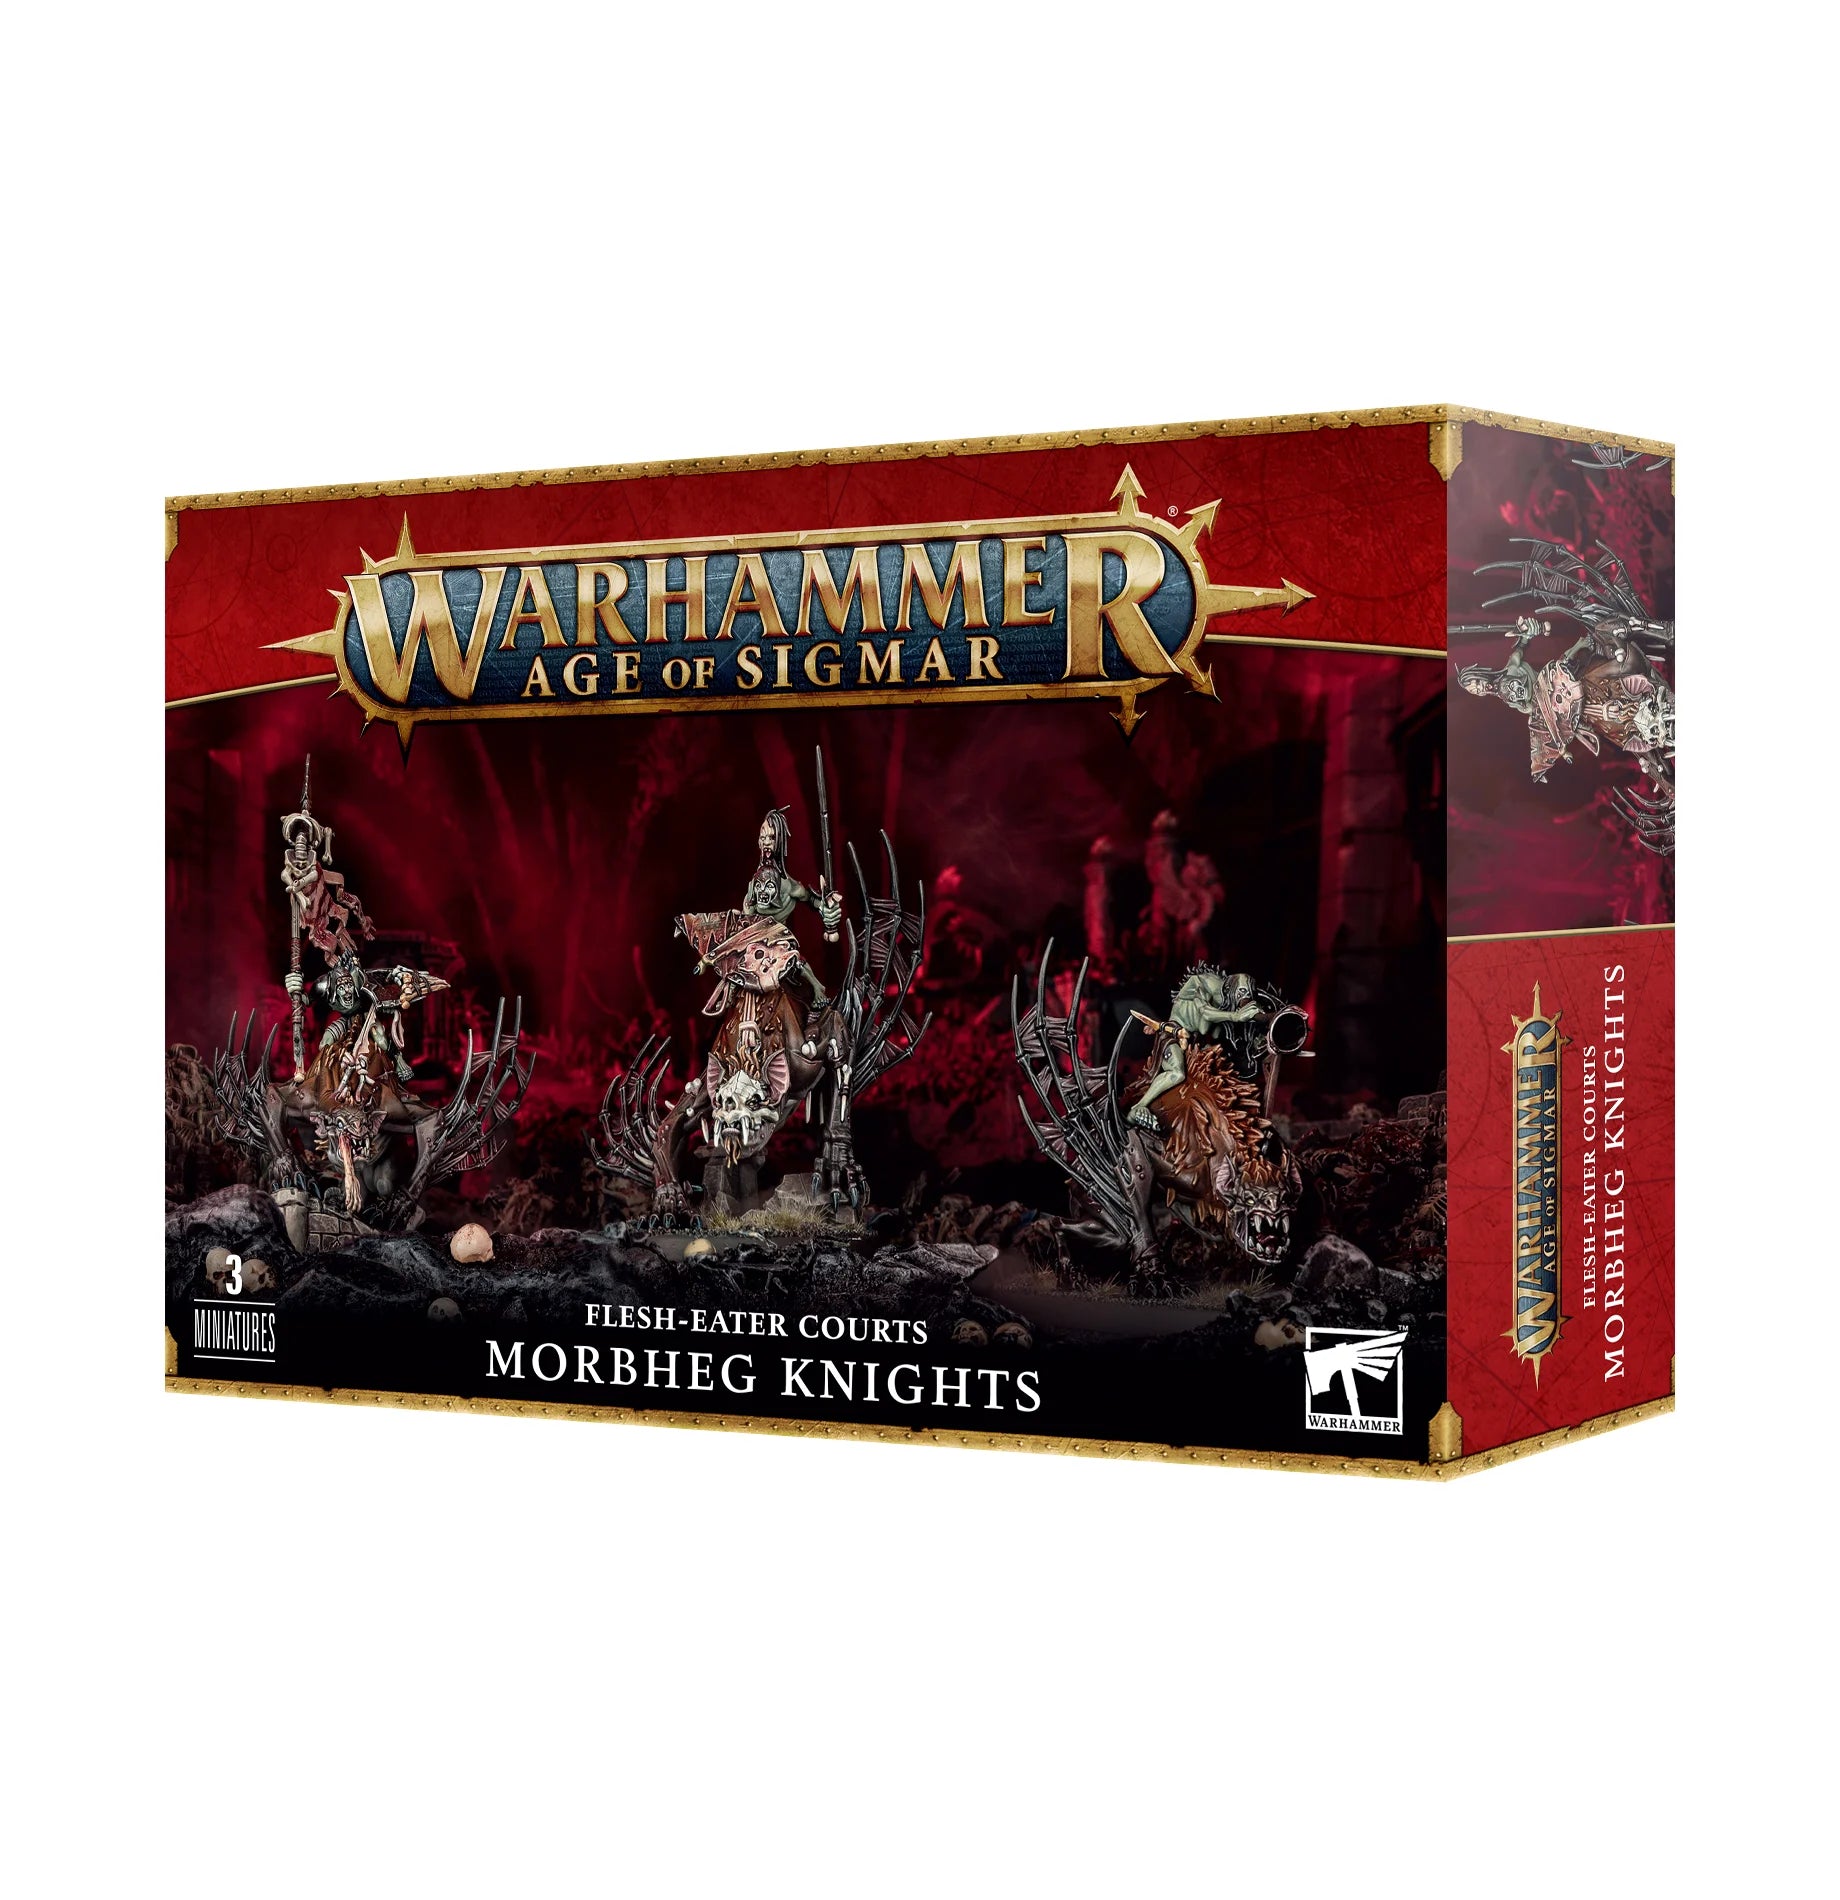 Warhammer Age of Sigmar: Felsh-Eater Courts Morbheg Knights